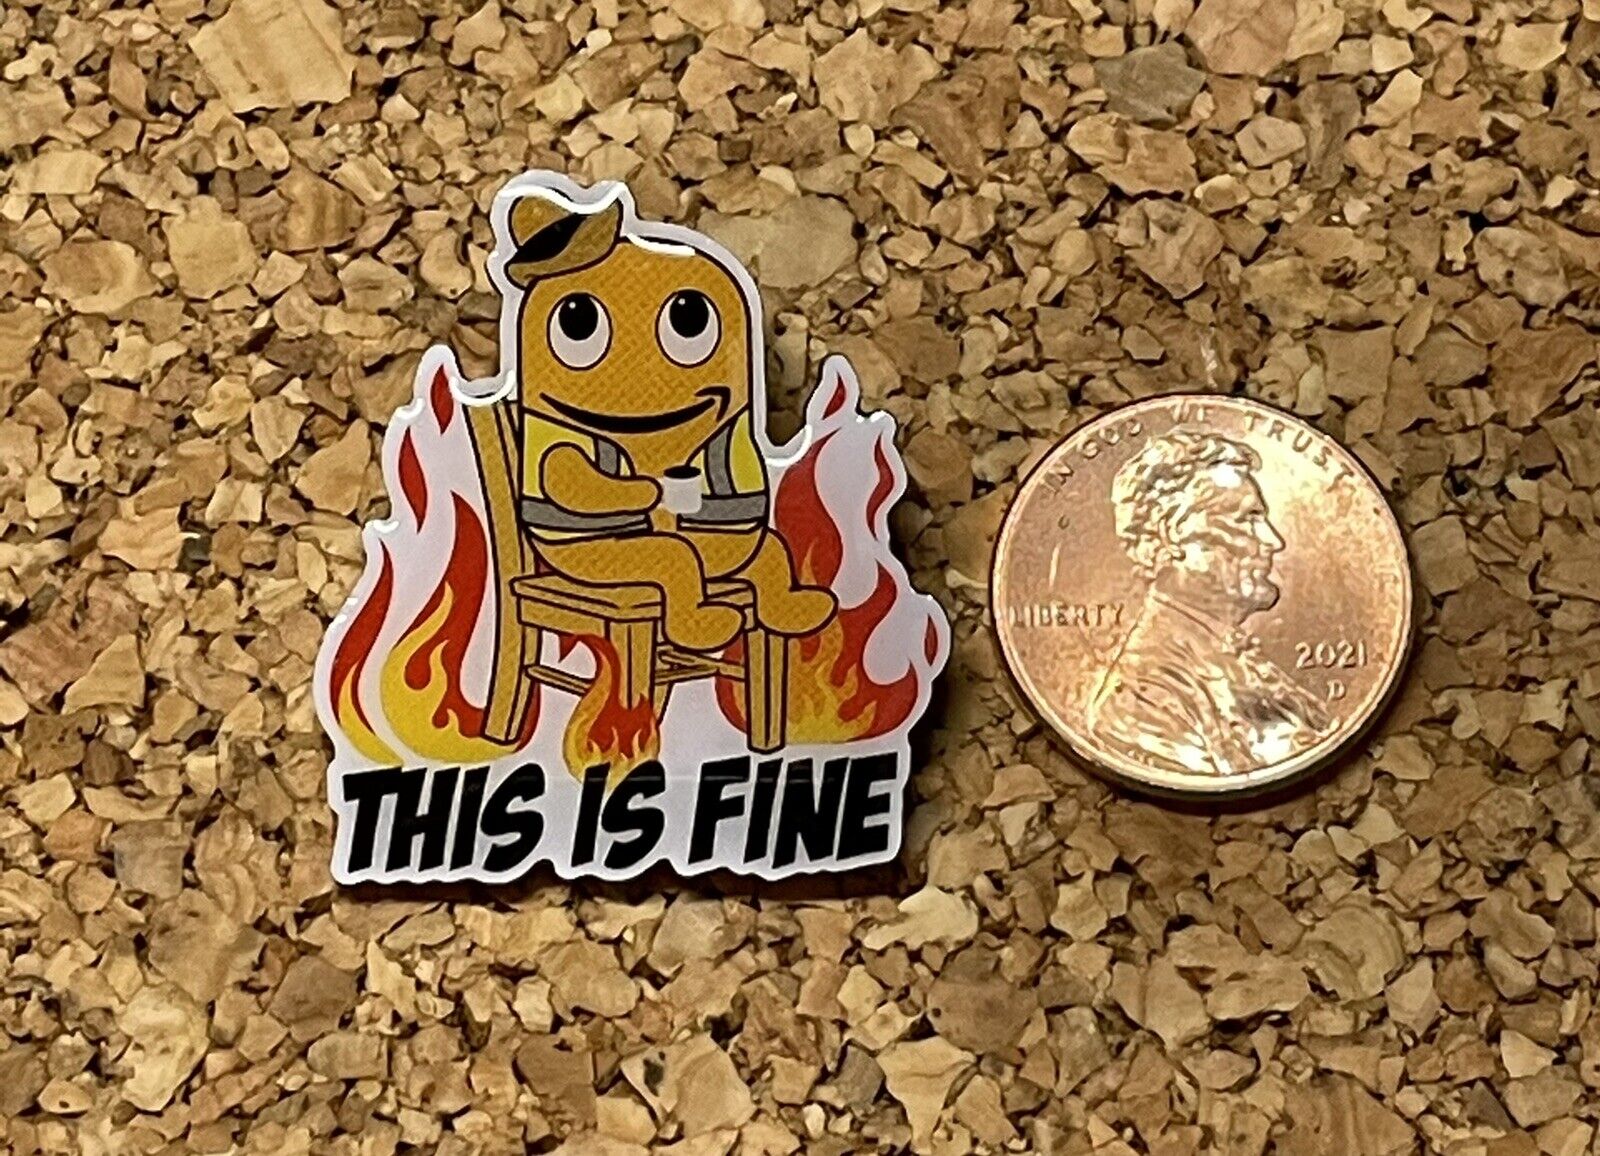 This is Fine Dumpster Fire Meme Amazon Peccy Pin - Brand New